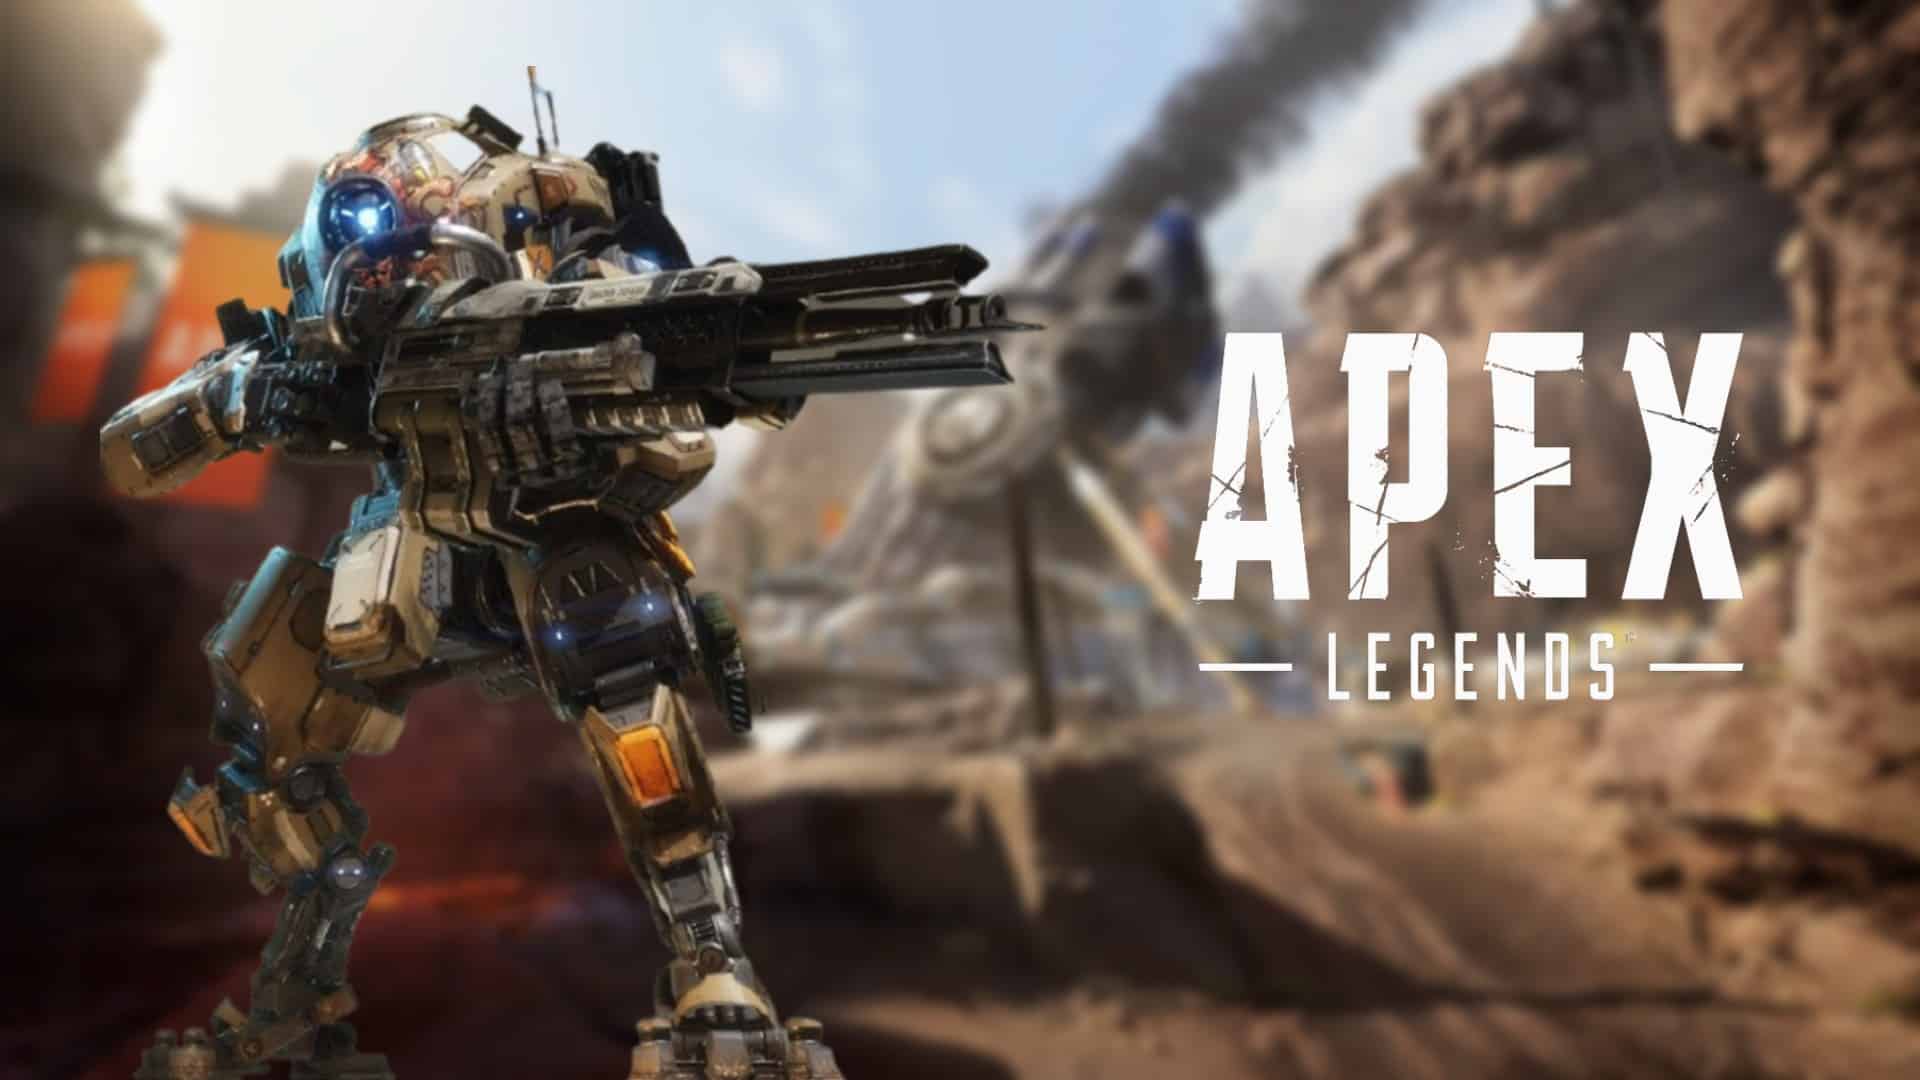 Incredible Apex Legends mod adds Battlefield-style tanks as new vehicles -  Dexerto